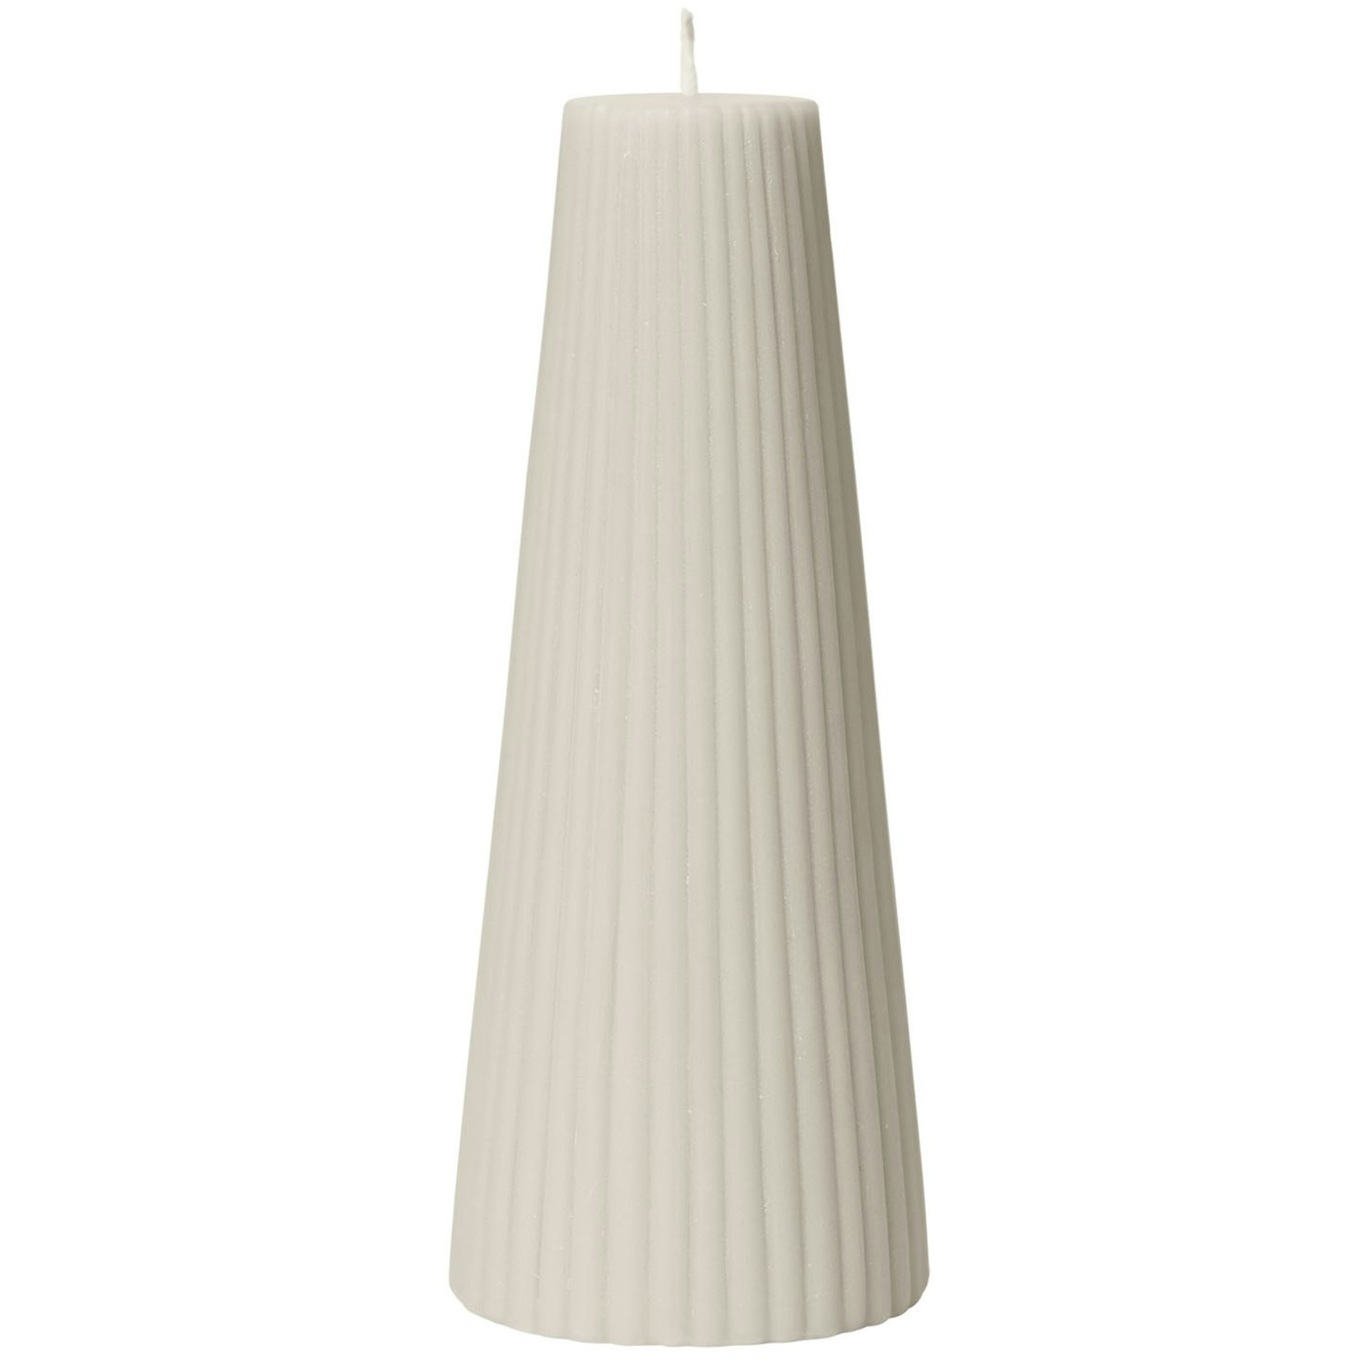 Grooved Trapez Kaars, Light Stone